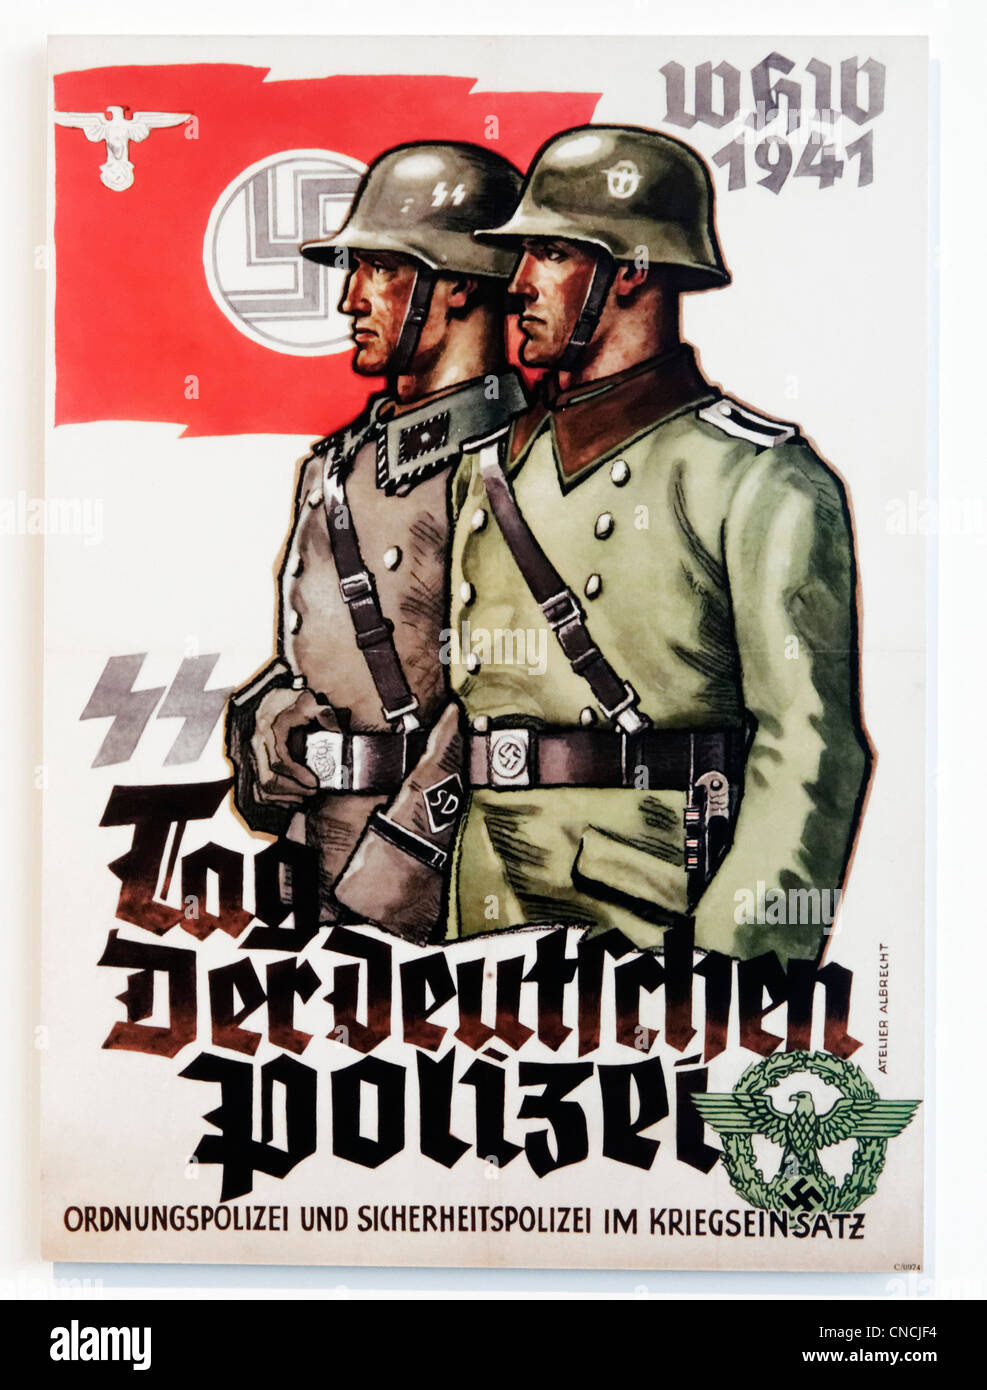 A nazi poster promoting the annual Police Day from 1941 Stock Photo